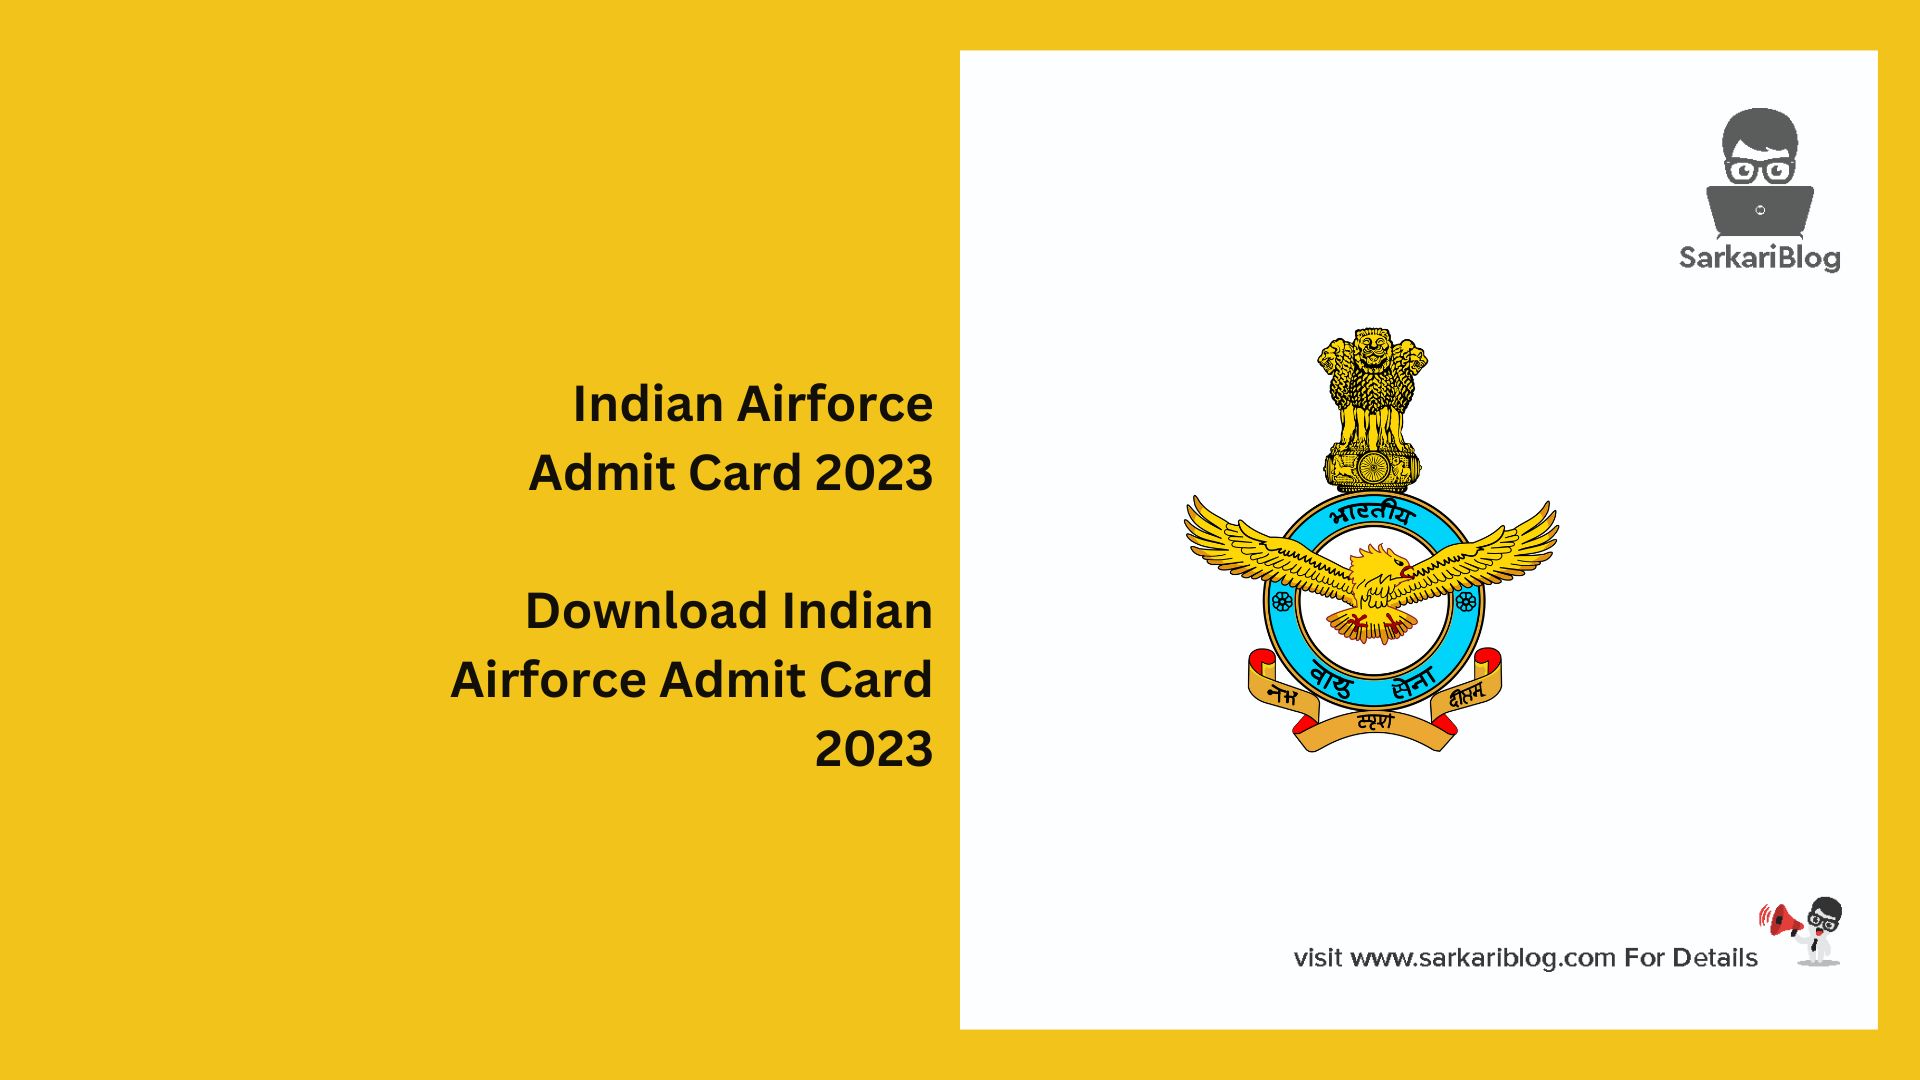 Indian Airforce Admit Card 2023